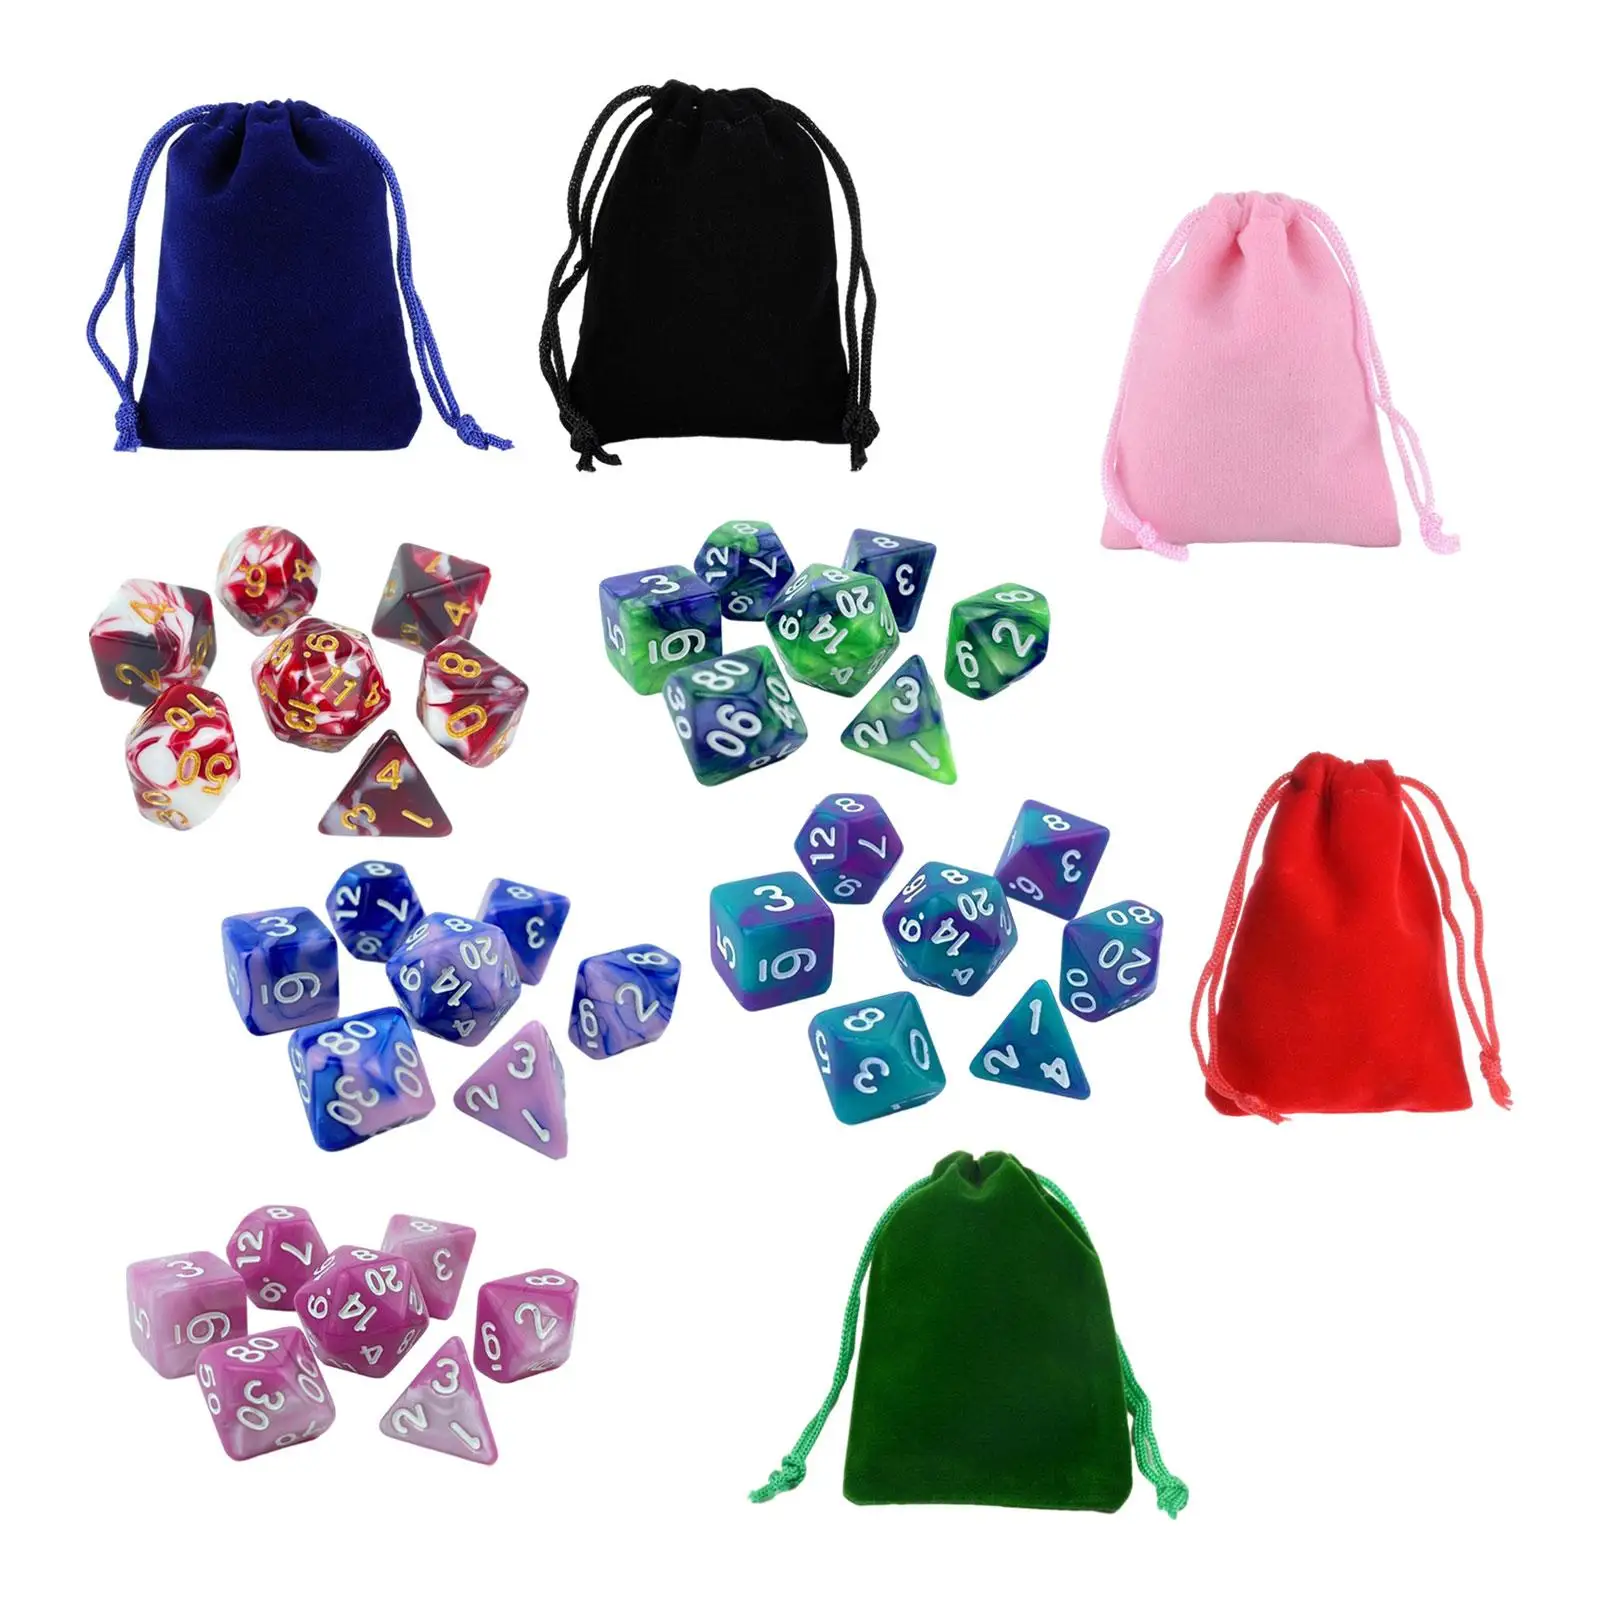 35 Pieces Polyhedral Dices Set with Drawstring Bags Table Game Handmade Dice Entertainment Toy for Wedding Party Favors Cafe